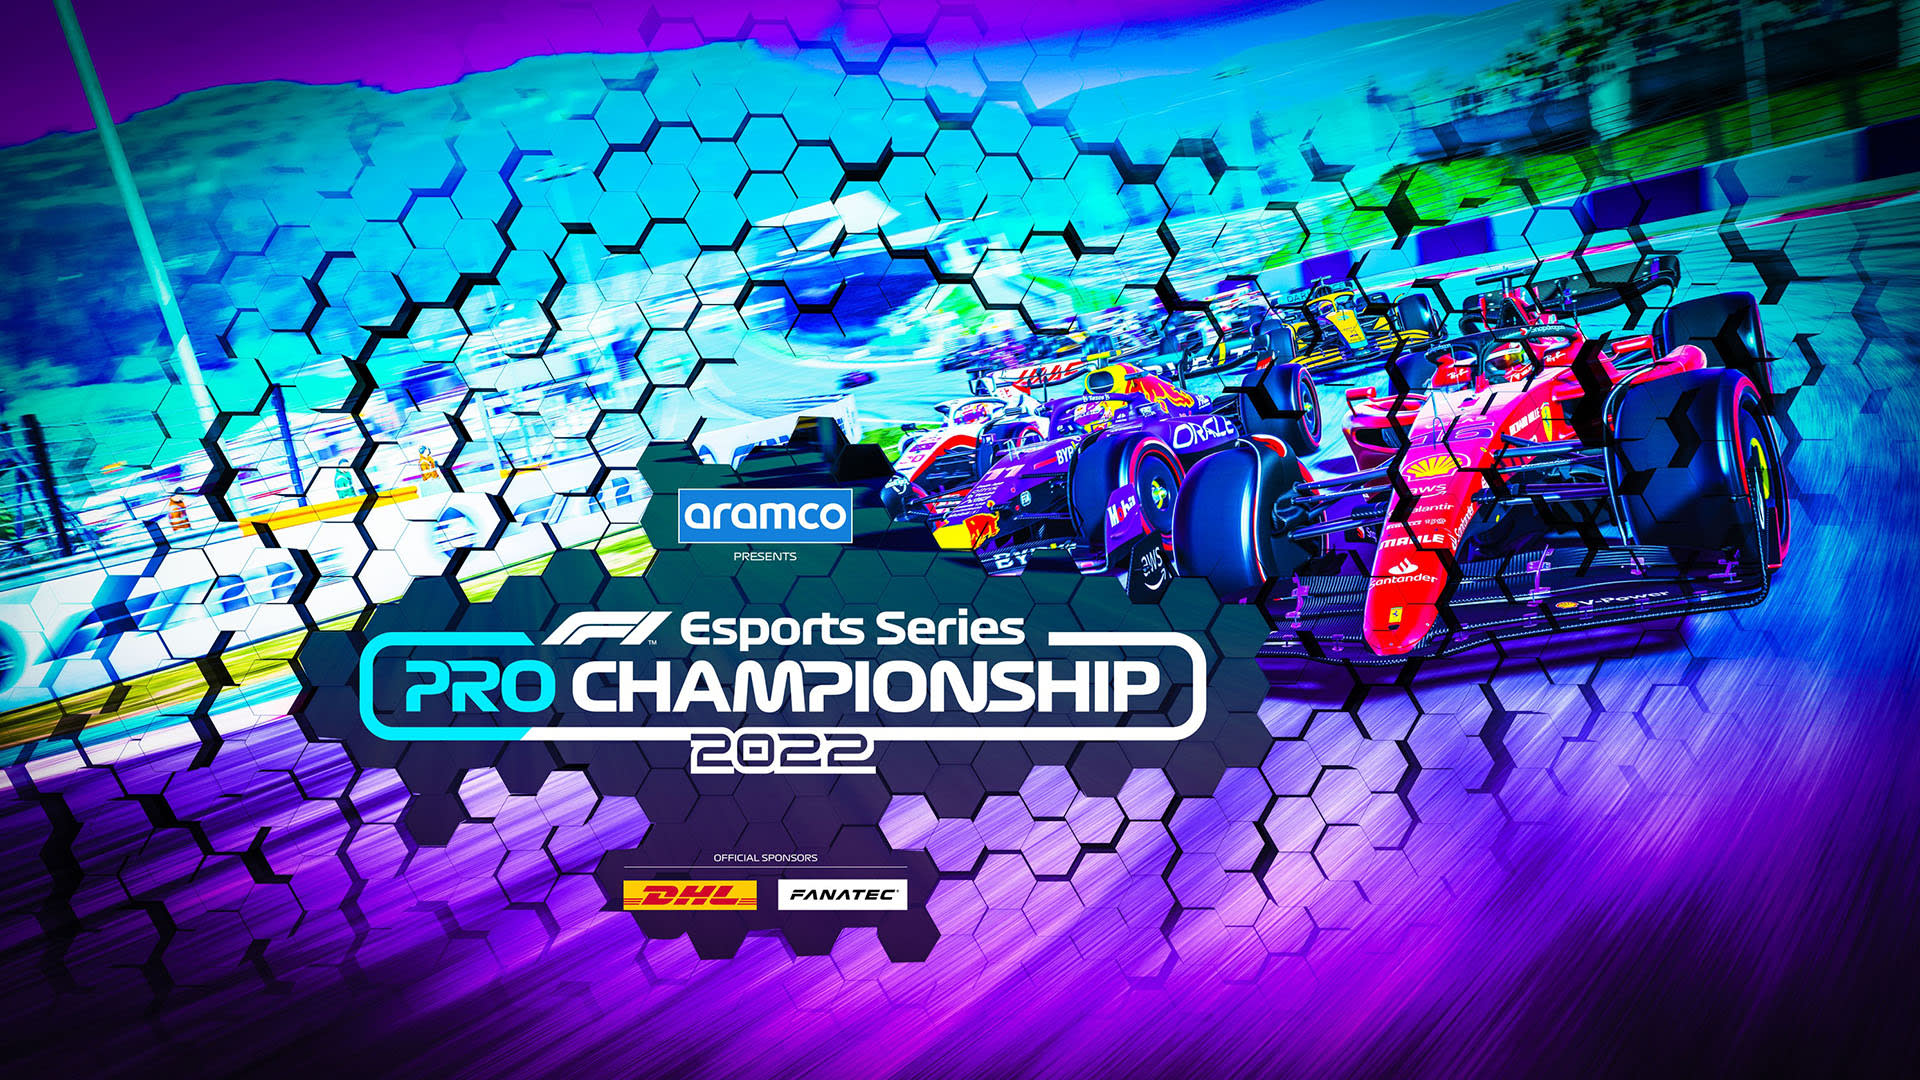 F1 Esports Series Pro Championship presented by Aramco returns for 2022 with revised format and more live shows Formula 1®